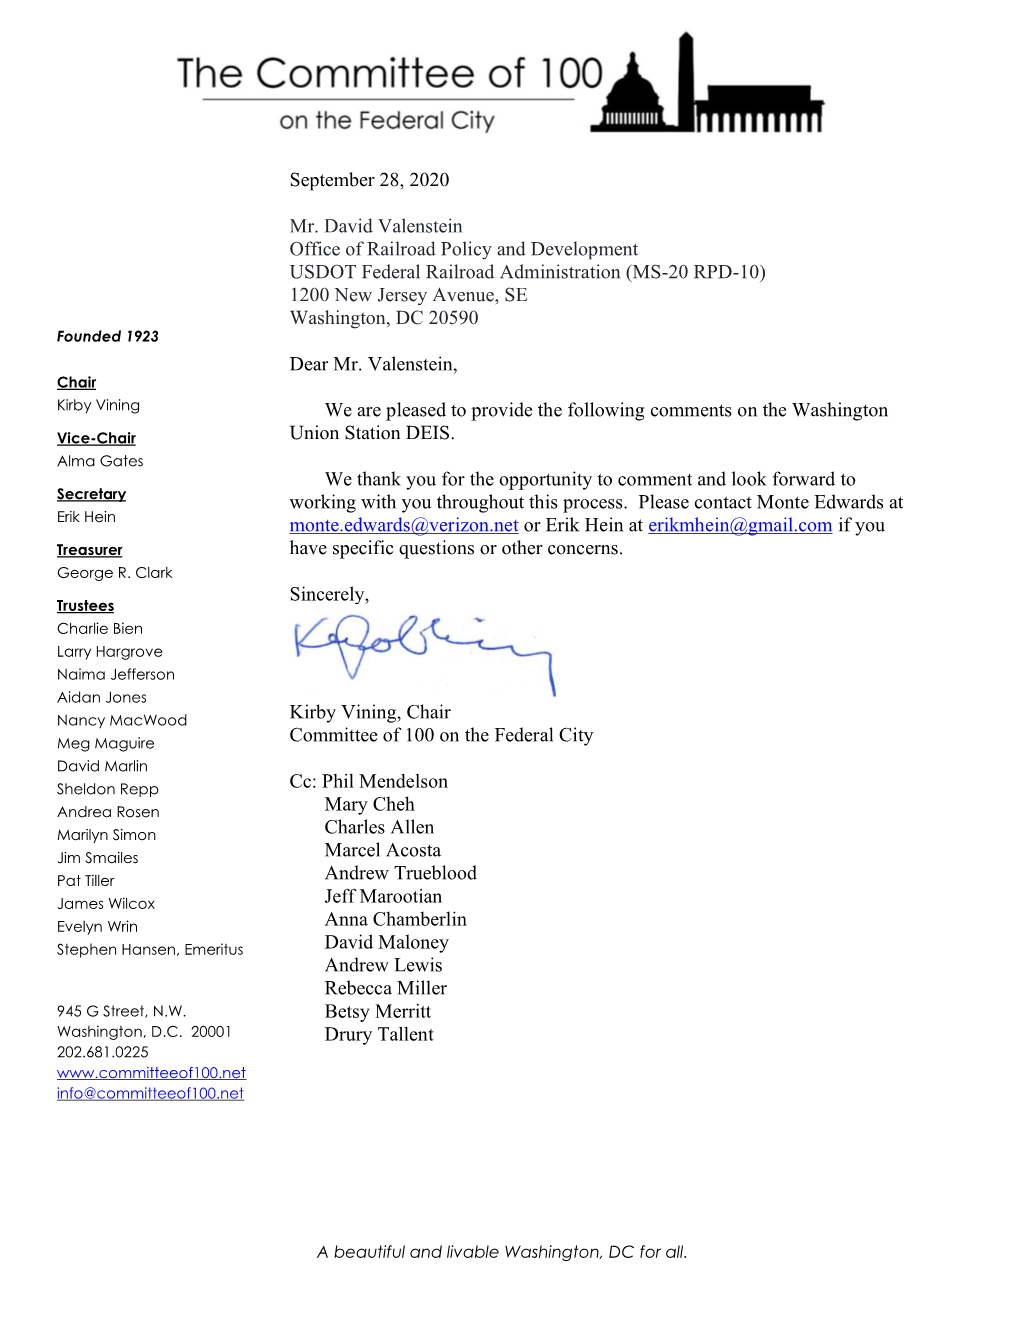 Committee of 100 Comments on DEIS 09-28-2020